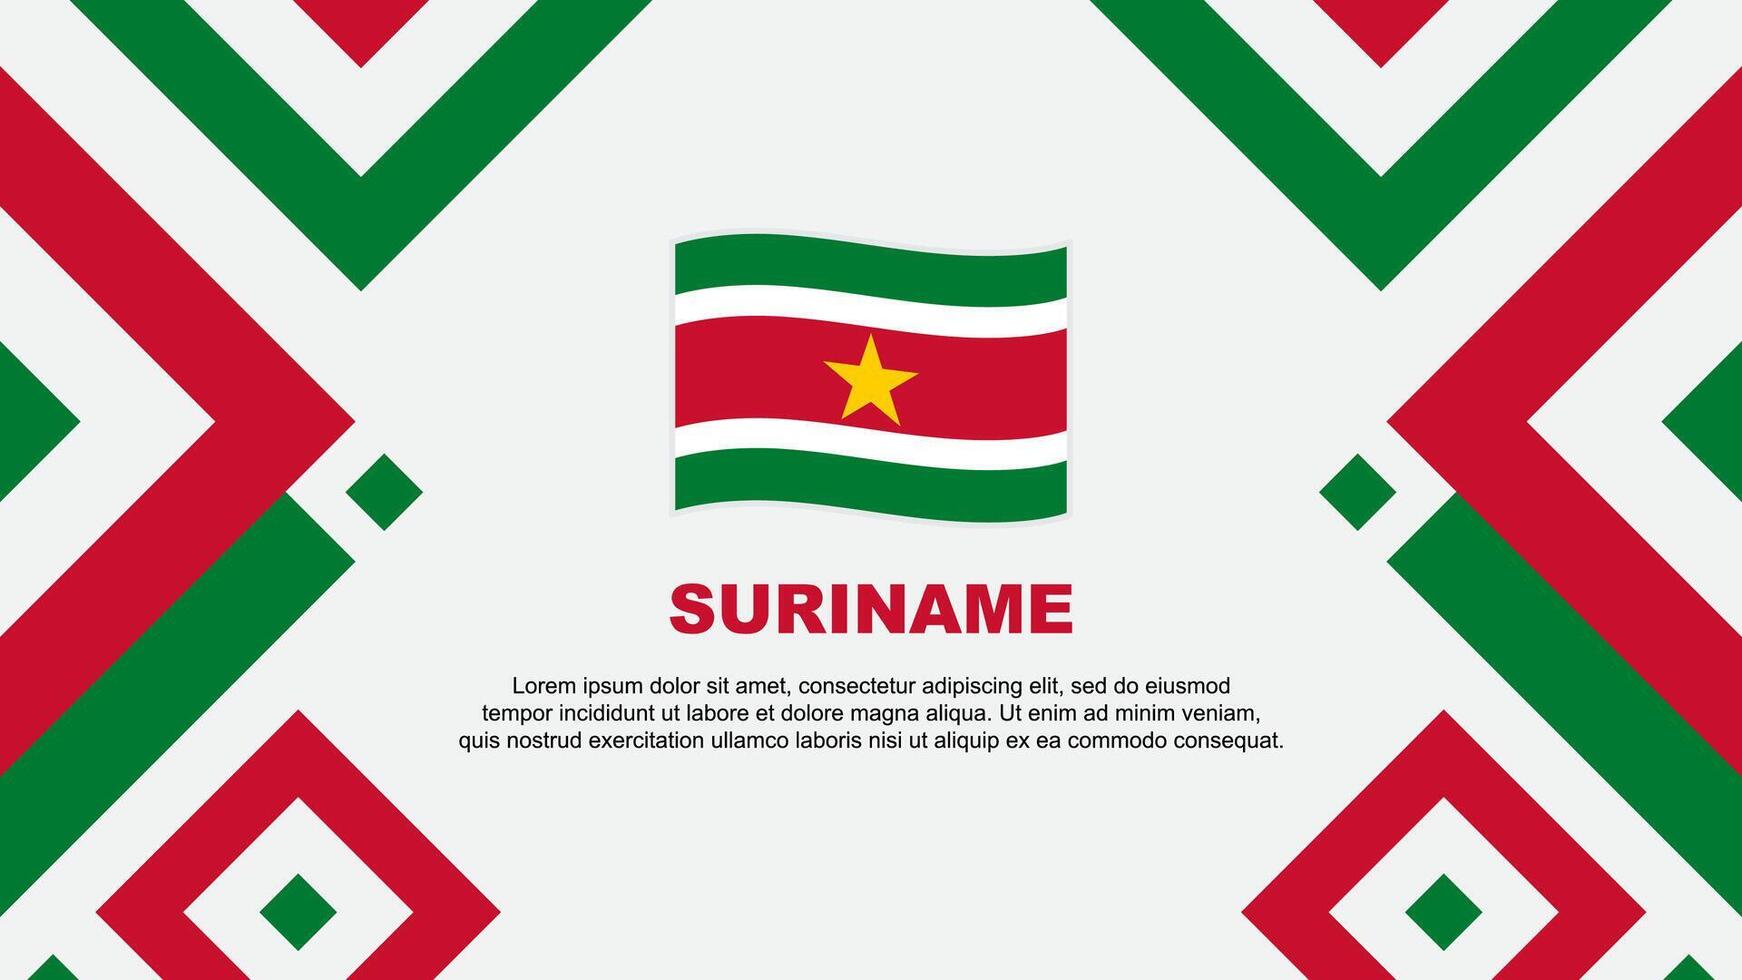 Suriname Flag Abstract Background Design Template. Suriname Independence Day Banner Wallpaper Vector Illustration. Suriname Template